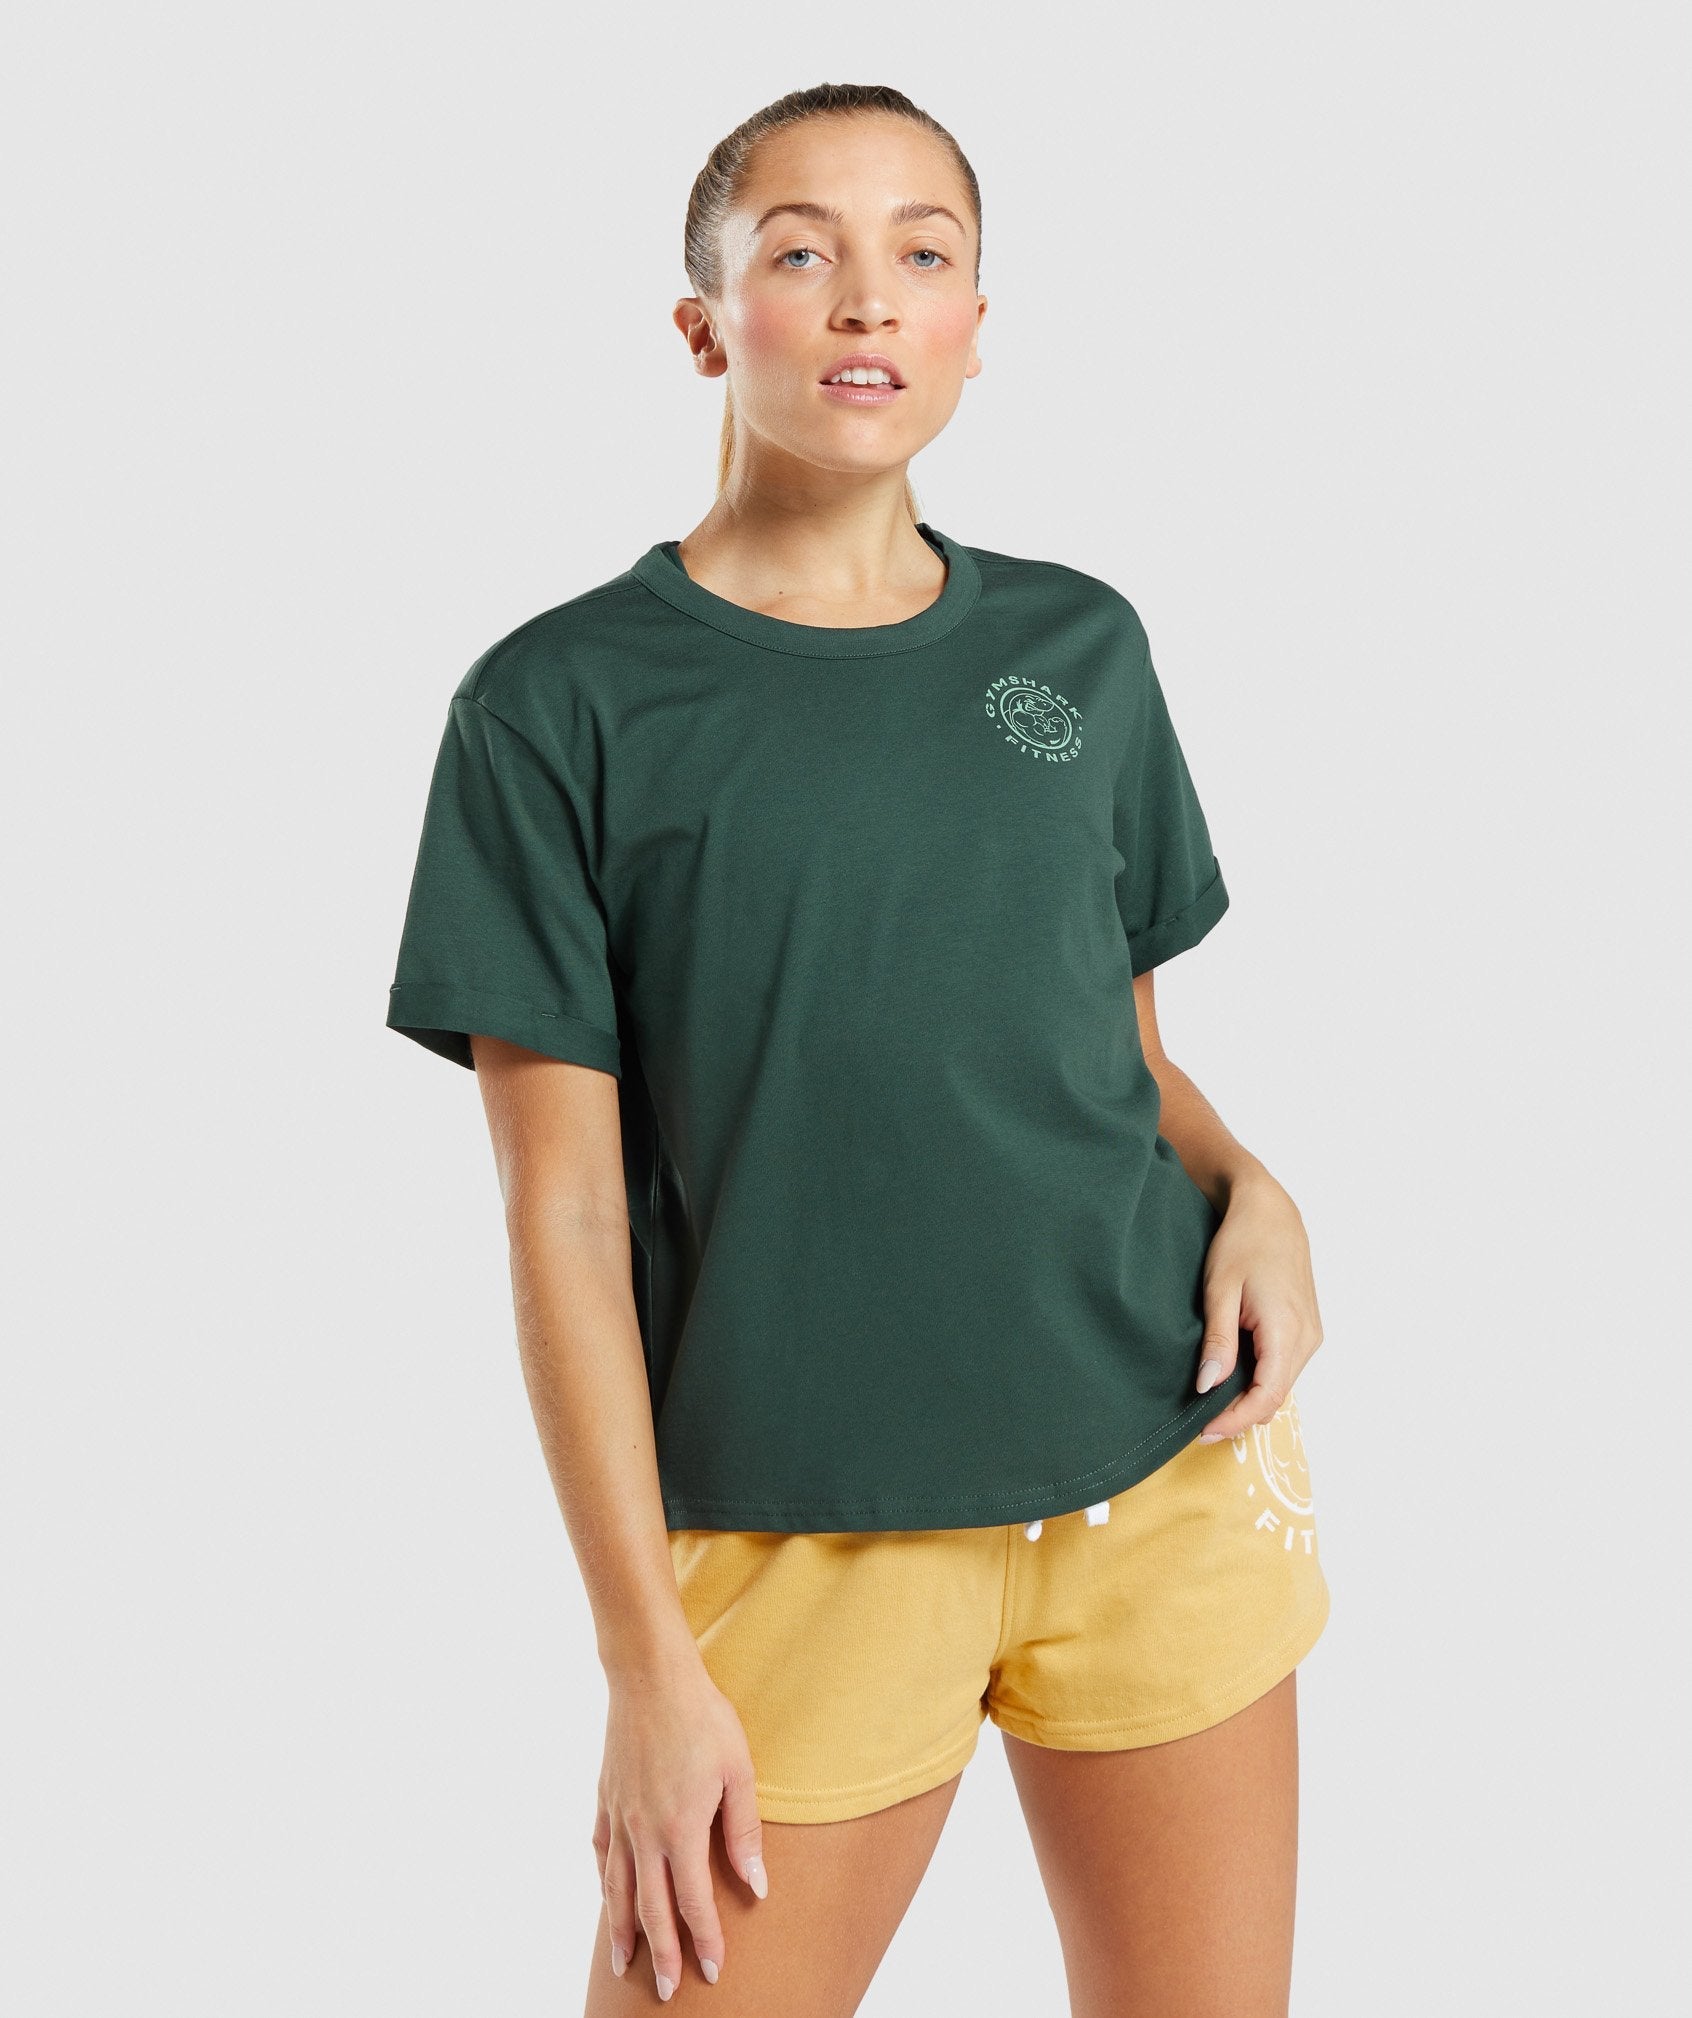 Legacy Graphic Tee in Dark Green - view 1